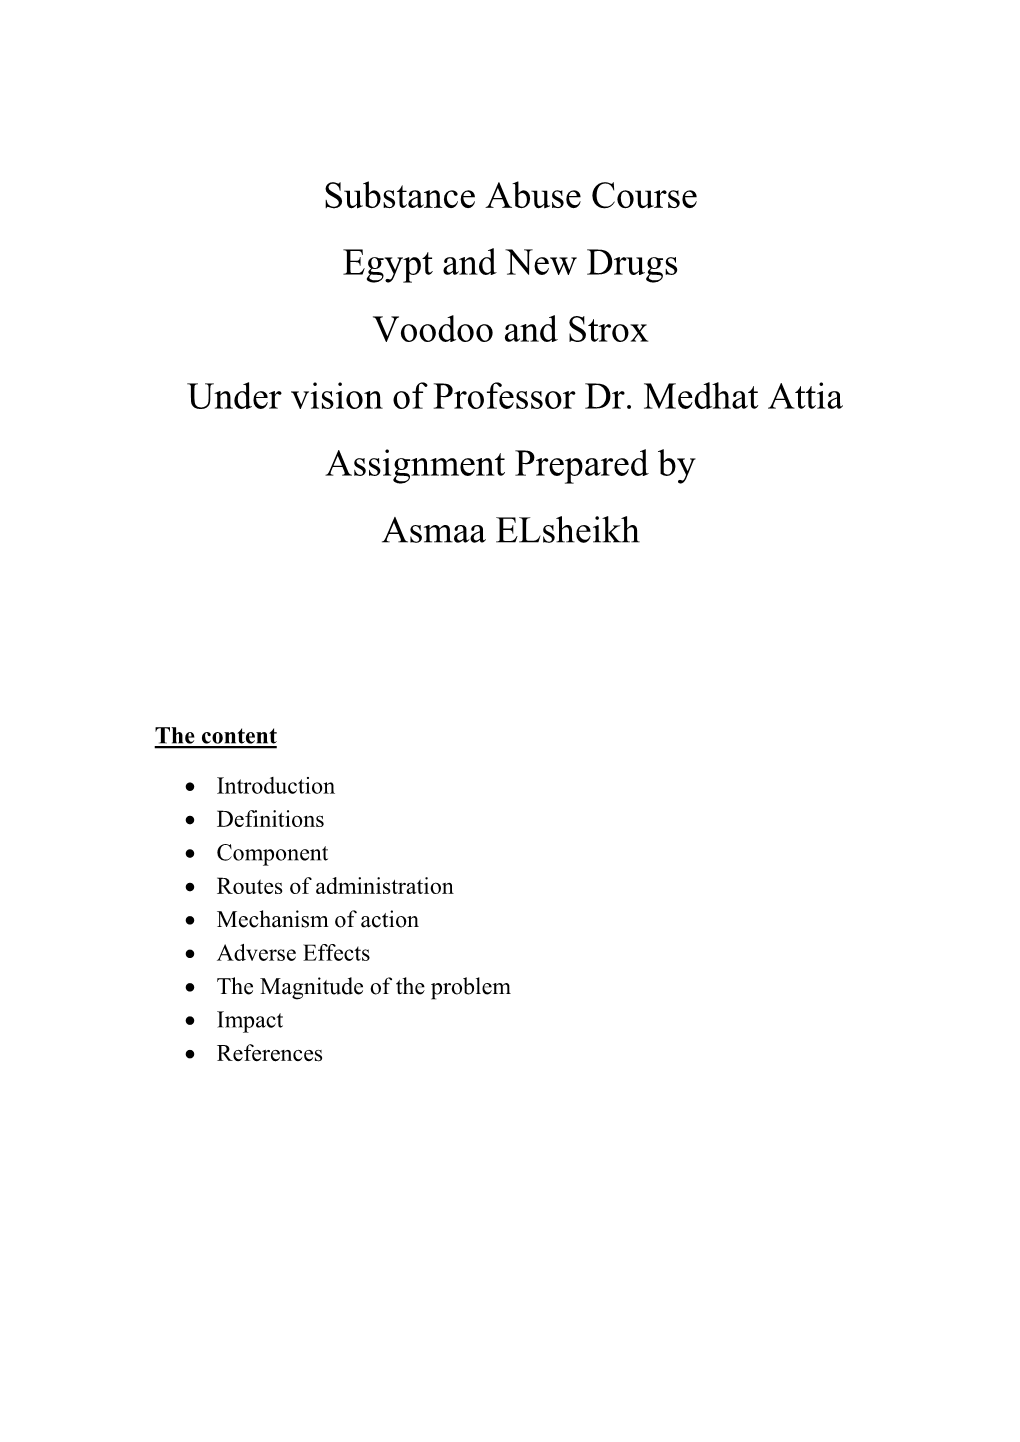 Substance Abuse Course Egypt and New Drugs Voodoo and Strox Under Vision of Professor Dr